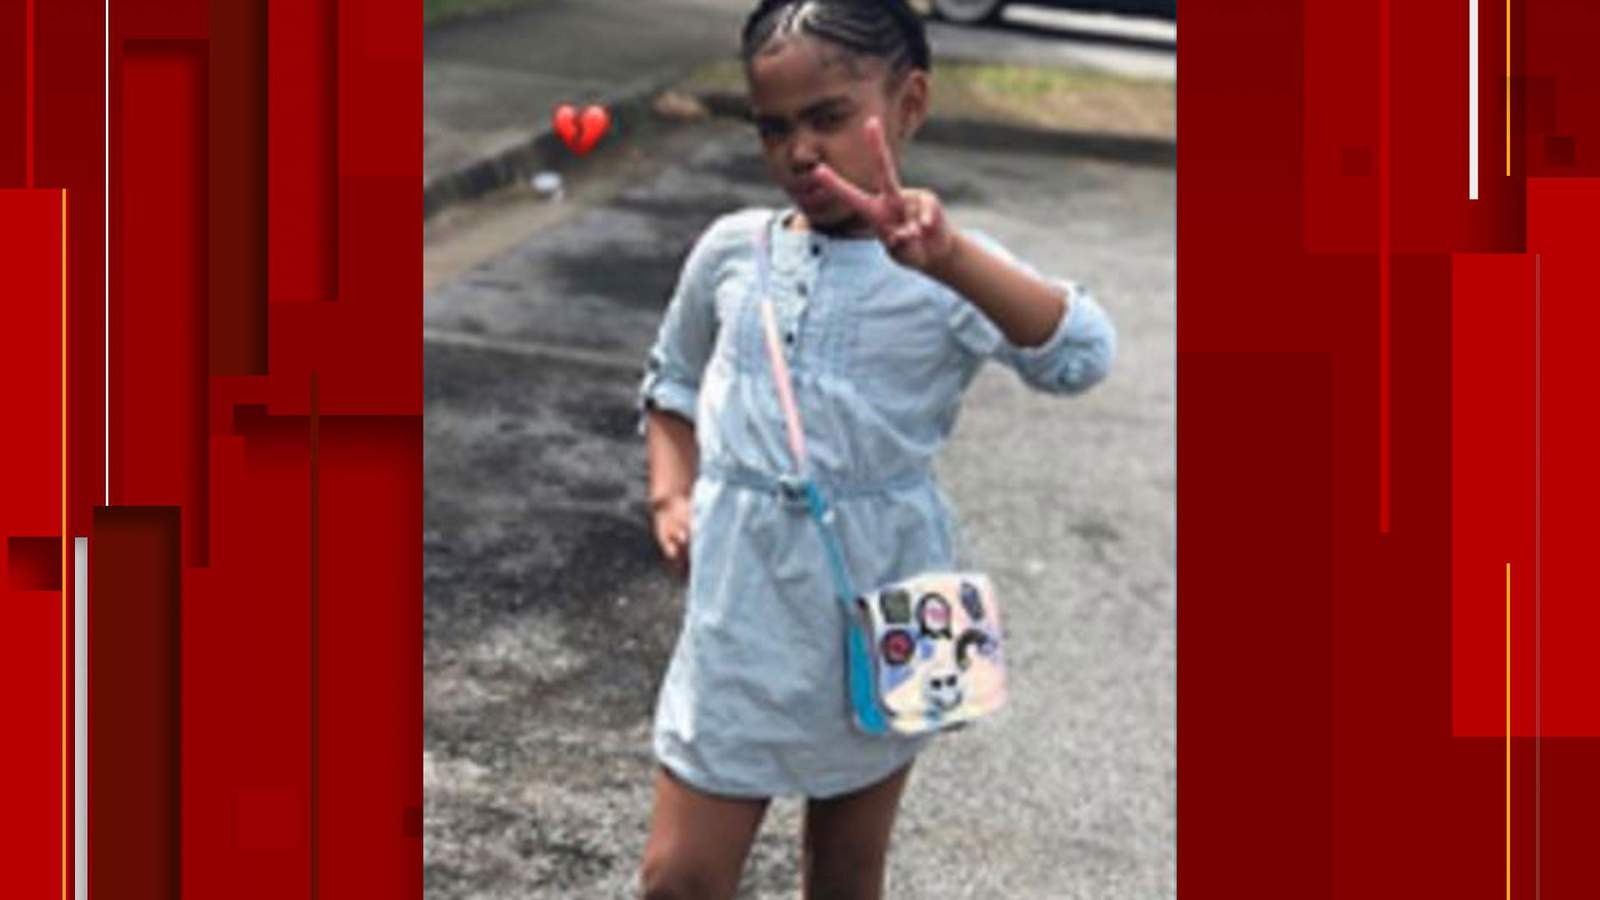 At least 2 shooters wanted for death of girl, 8, in Atlanta